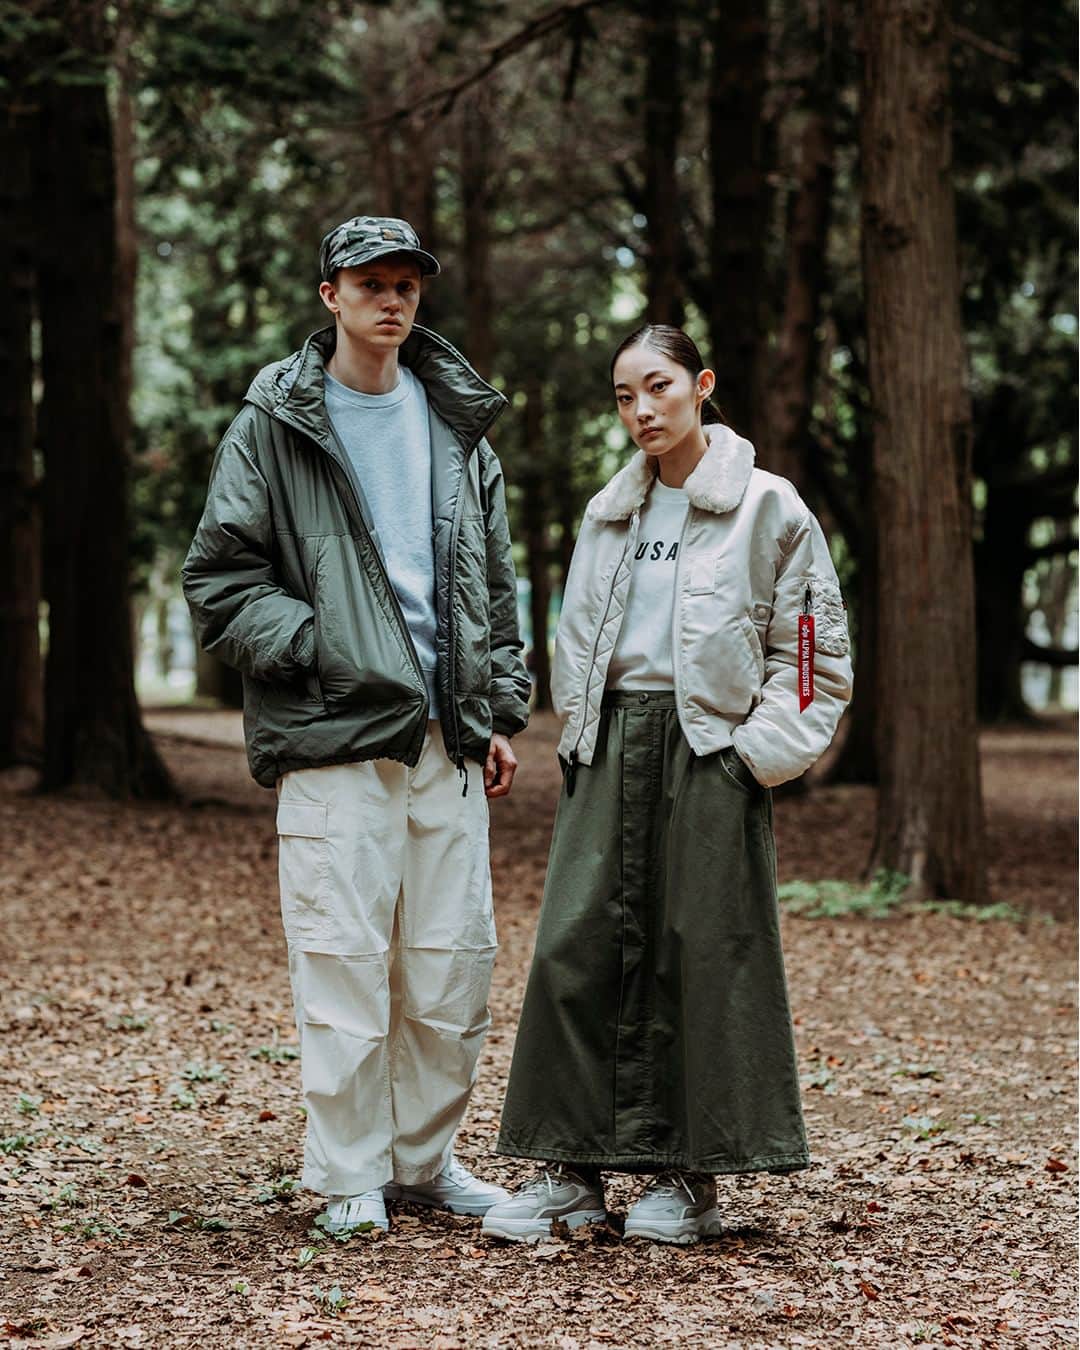 ALPHA INDUSTRIES JAPANのインスタグラム：「①▶From Left to Right 【OUTER】ECWCS MONSTER PARKA # TA1682 Price : ¥38,500(in tax) Color : 059(V.GRAY)  ※10/中旬 入荷予定   【OUTER】W' B-15 SHORT # TA7184 Price : ¥27,500(in tax) Color : 065(LIME STONE)  ※10/上旬 入荷予定  ②From Left to Right 【OUTER】ECWCS GEN1 COLD WEATHER PARKA # TA1653 Price : ¥38,500(in tax) Color :  001(BLACK) ※10/中旬 入荷予定  【OUTER】W' MA-1 SHORT # TA7182 Price : ¥24,200(in tax) Color :  019(D.GREEN)   【OUTER】PATCHED HOODED RIB JACKET # TA1674 Price : ¥29,700(in tax) Color :  076(RP.GRAY) ※10/下旬 入荷予定  【OUTER】MA-1 CORE SPEC VARSITY JACKET # TA0497 Price : ¥29,700(in tax) Color :  9067(RP.BLUE) ※10/下旬 入荷予定    #alpha_industries_japan  #alpha_industries  #ALPHAINDUSTRIES #ALPHA #ALPHASHOP #MA1」